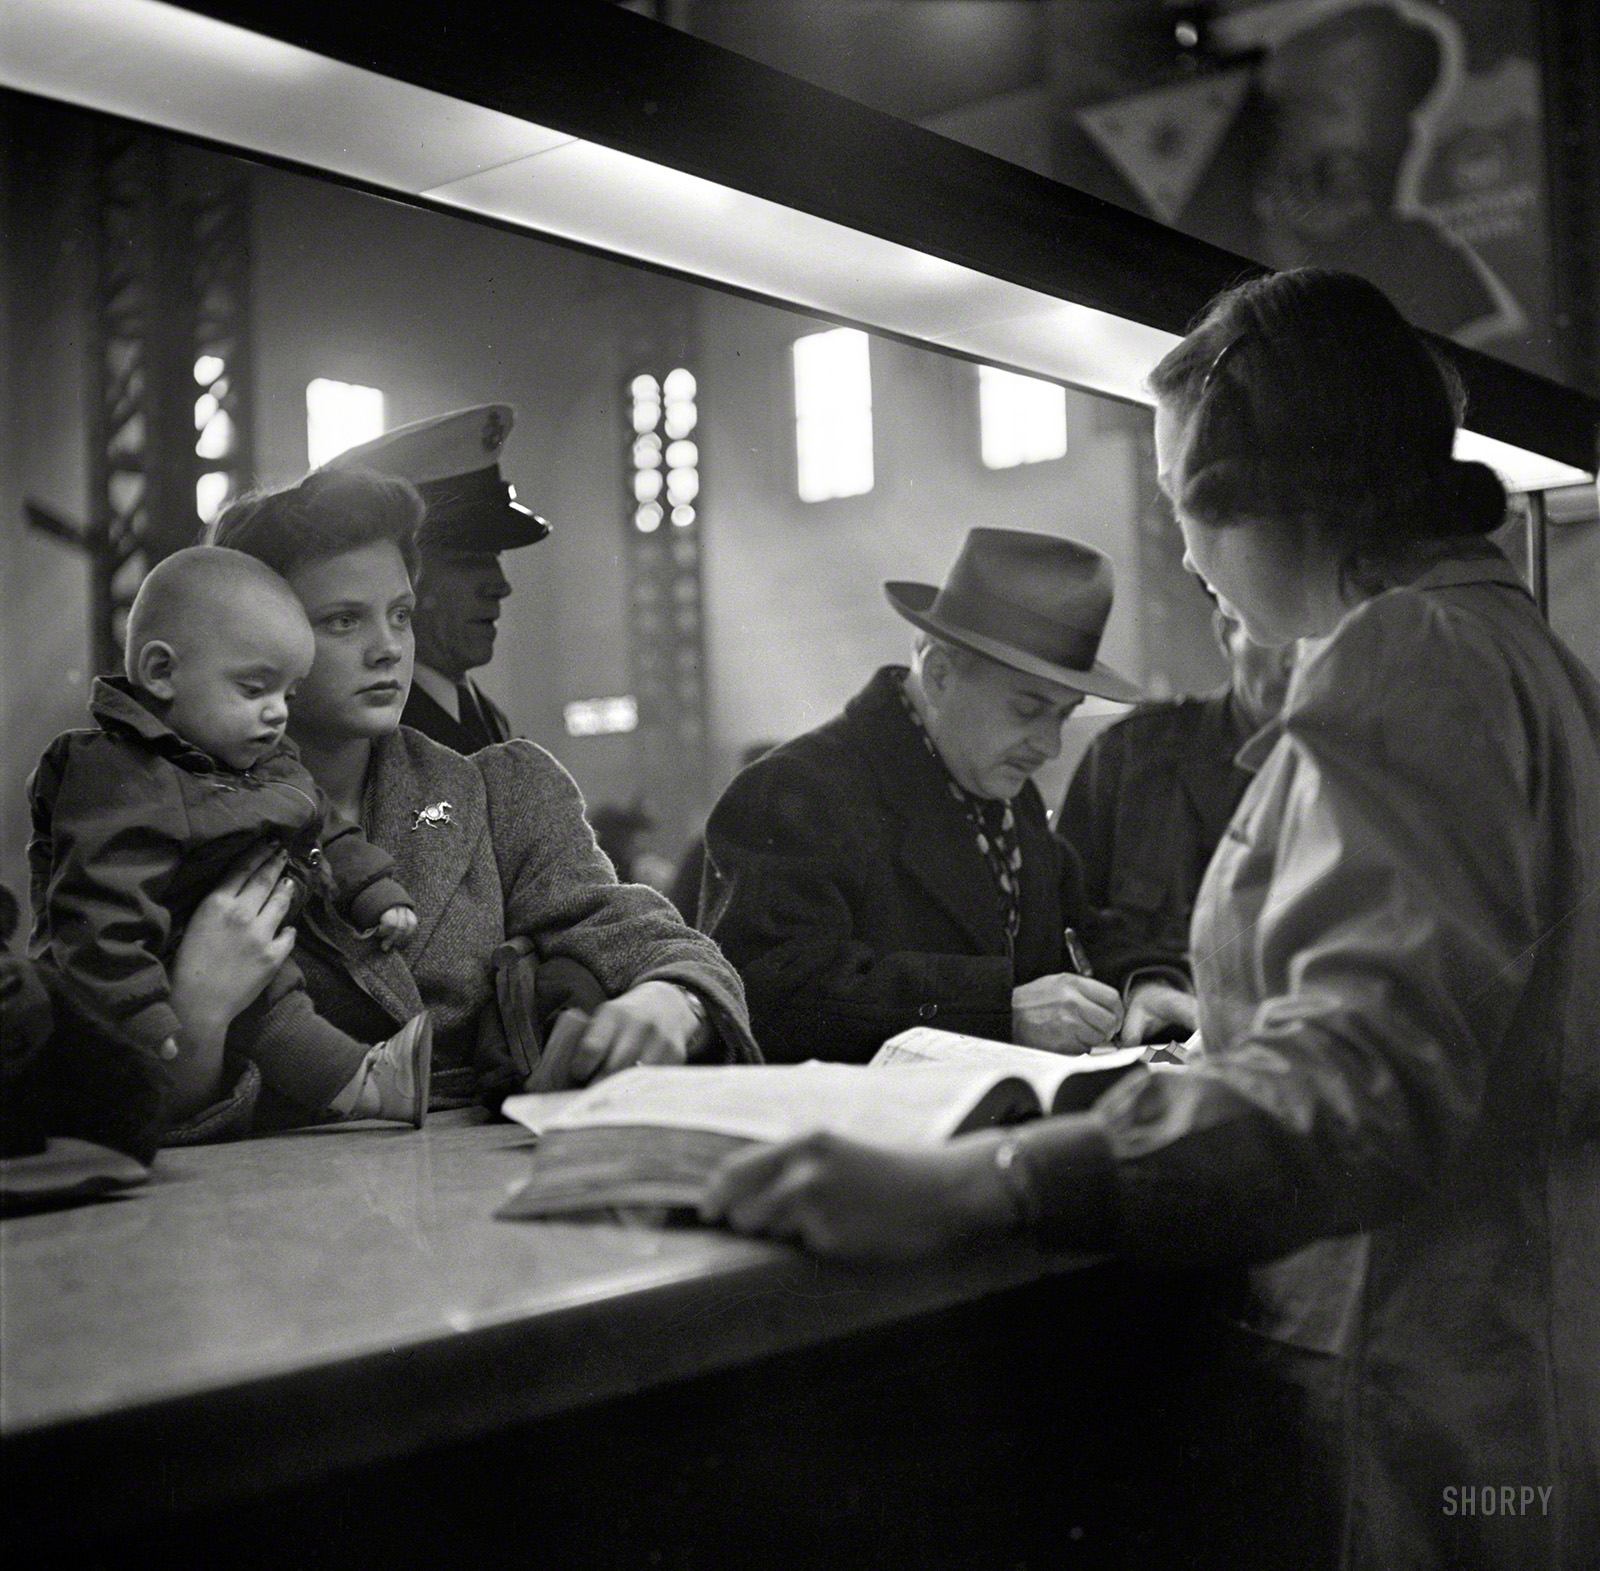 January 1943. "At the information desk at Union Station, Chicago." Our Lady of the Rails. Photo by Jack Delano for the Office of War Information. View full size.